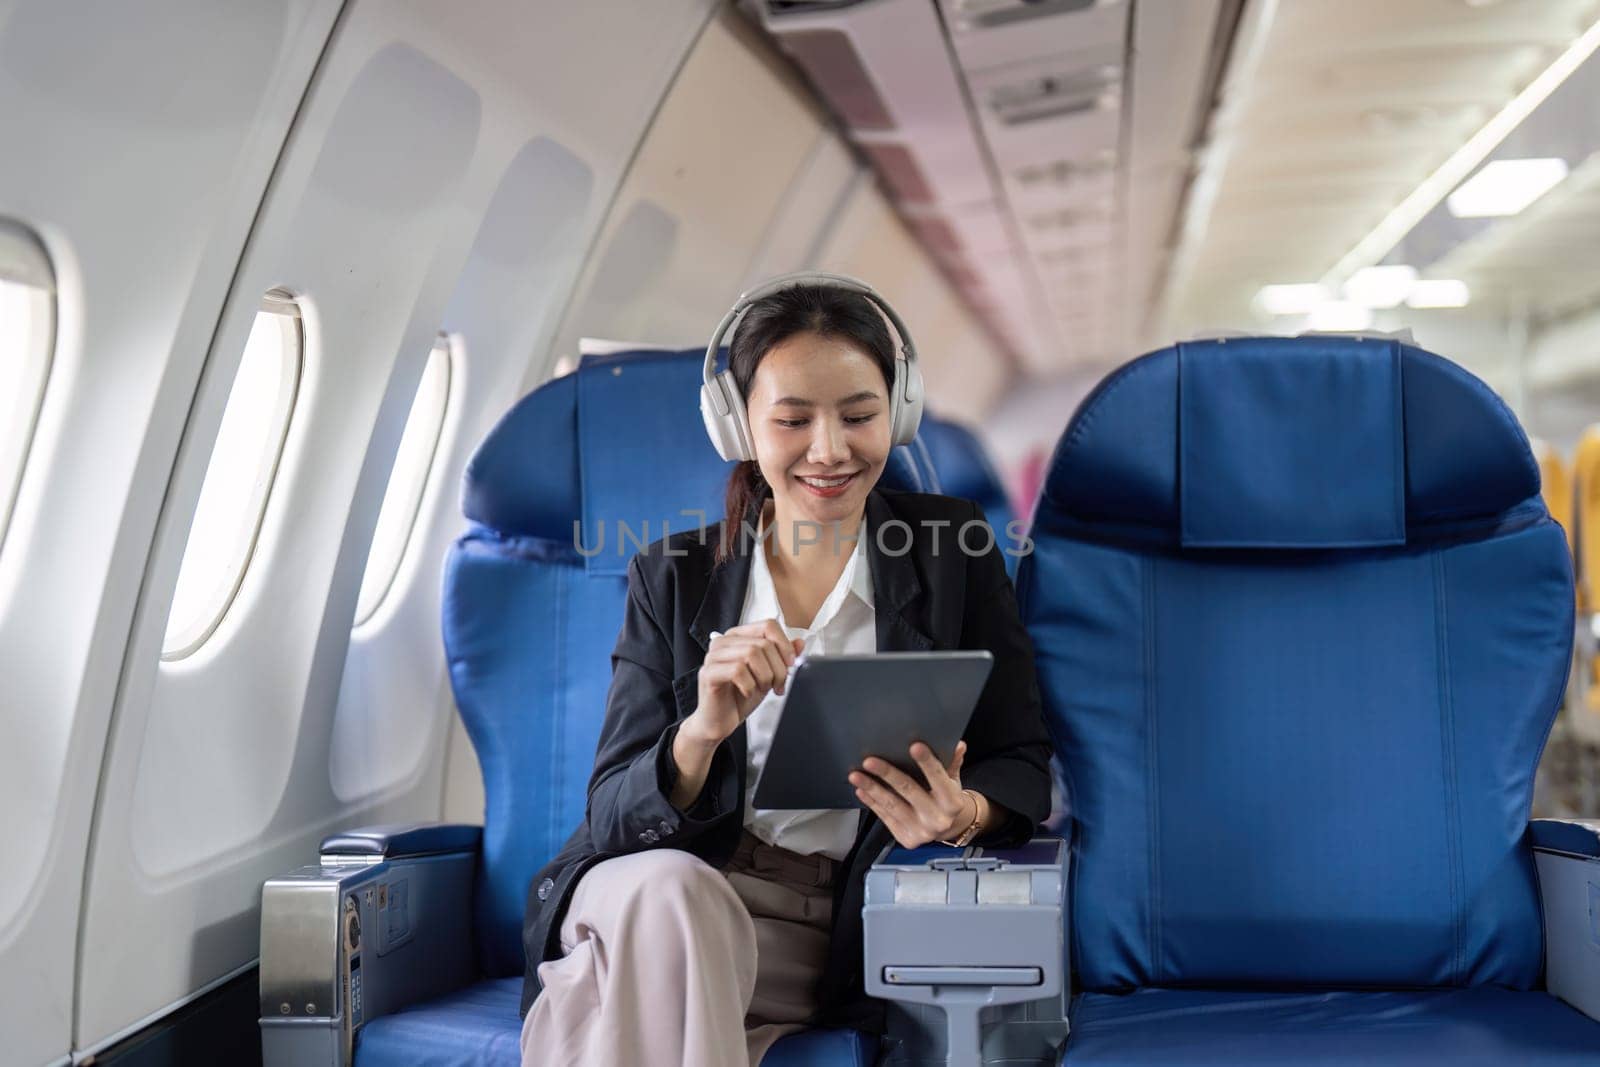 A woman is sitting on a blue airplane seat with a tablet in her hand. She is smiling and she is enjoying her time on the plane